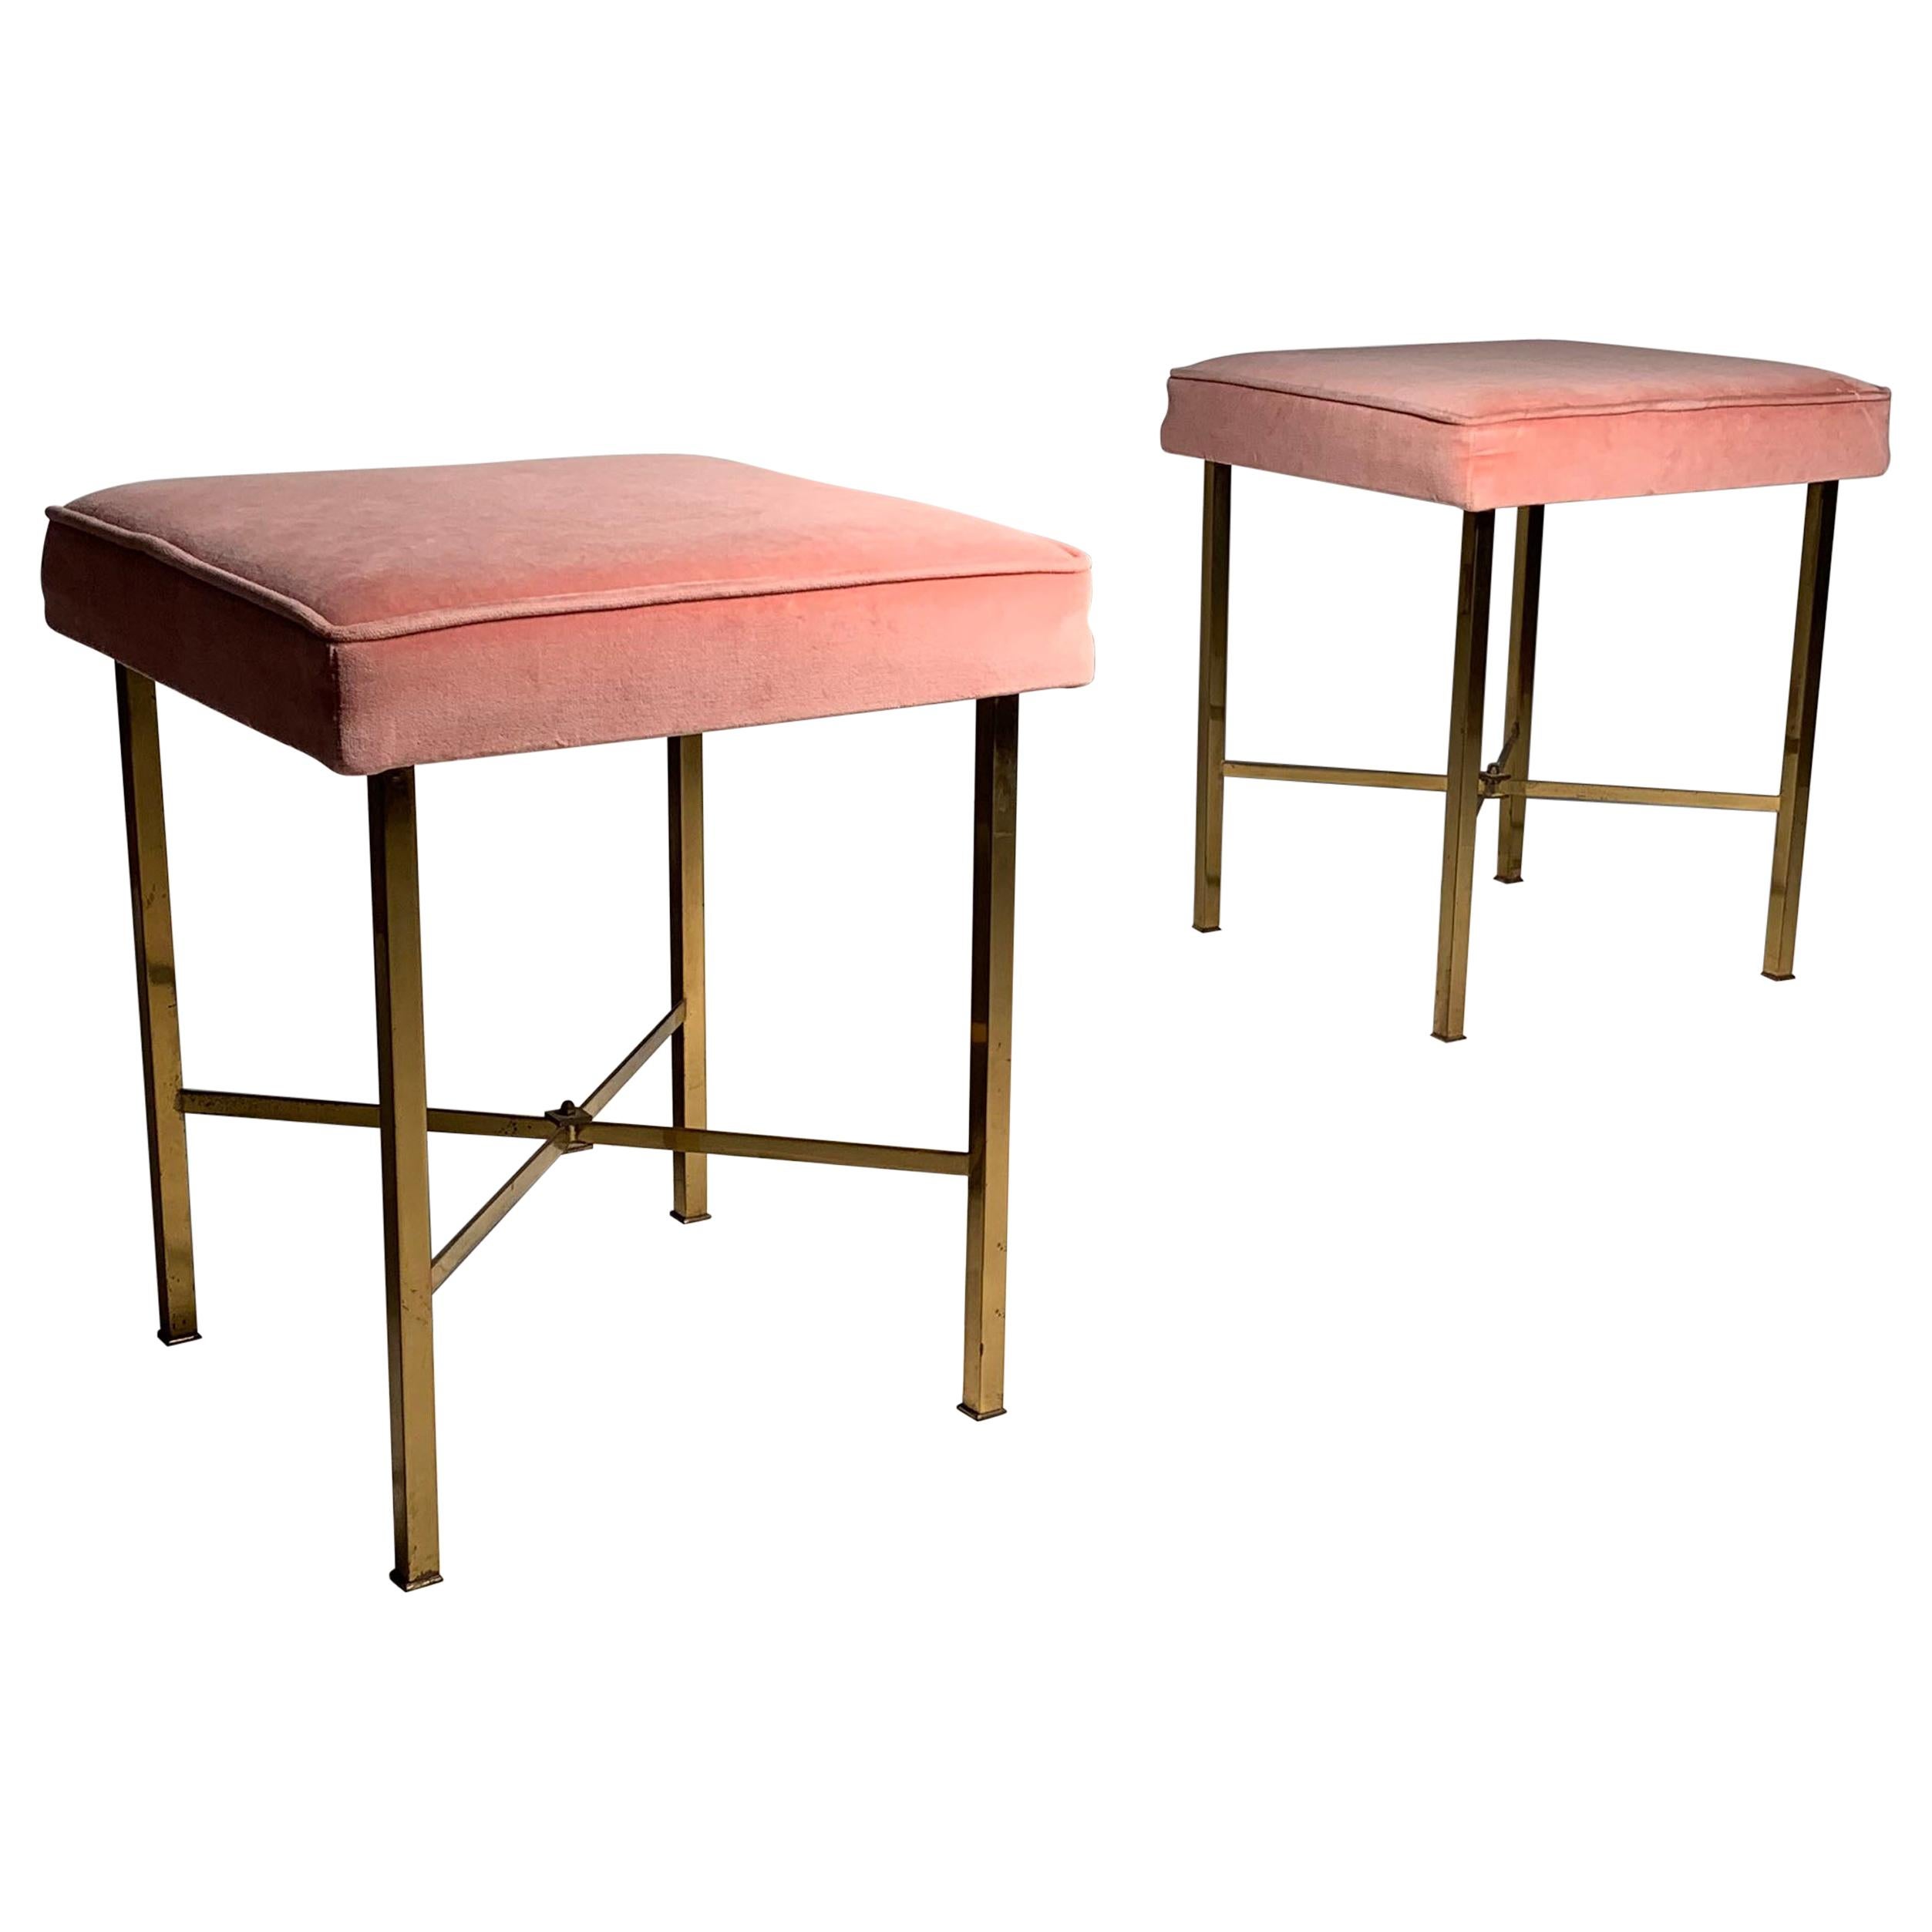 Pair of Mid-Century Modern Stools in the Manner of Paul McCobb